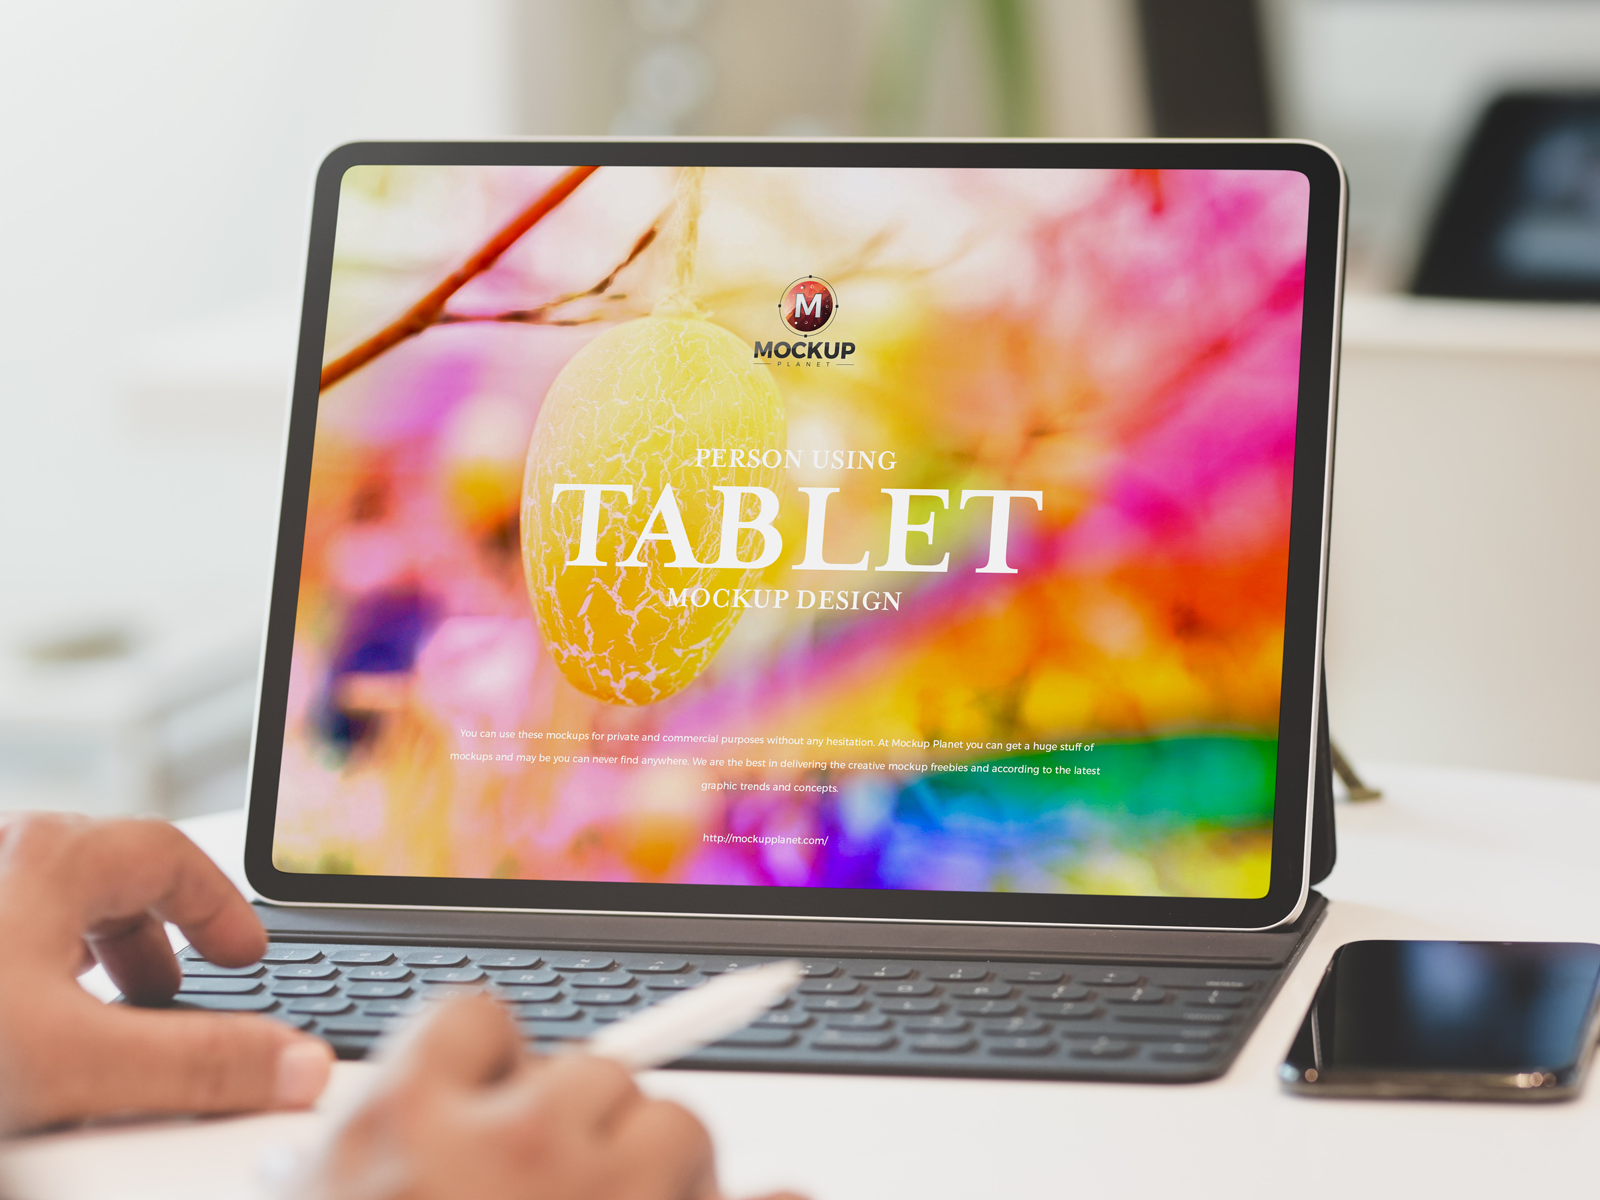 Free Person Using Tablet Mockup by Mockup Planet on Dribbble